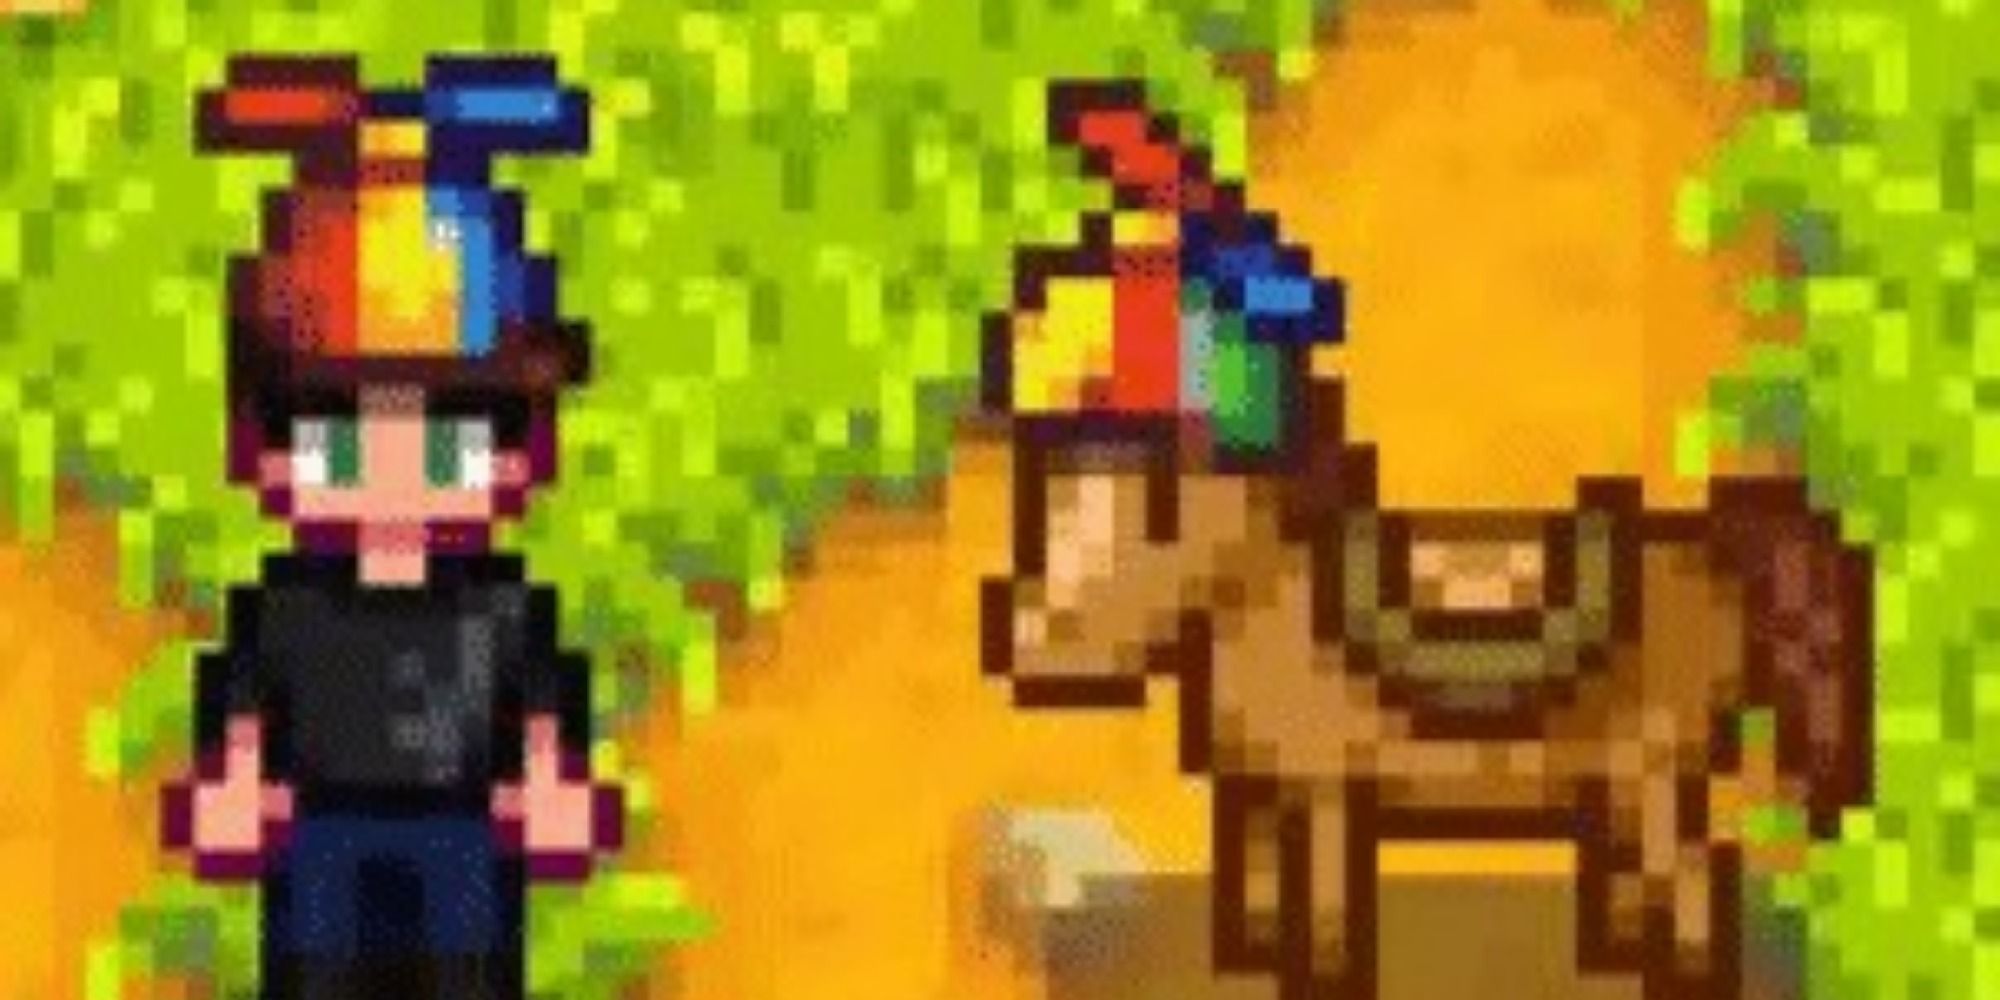 propeller hat on player and horse